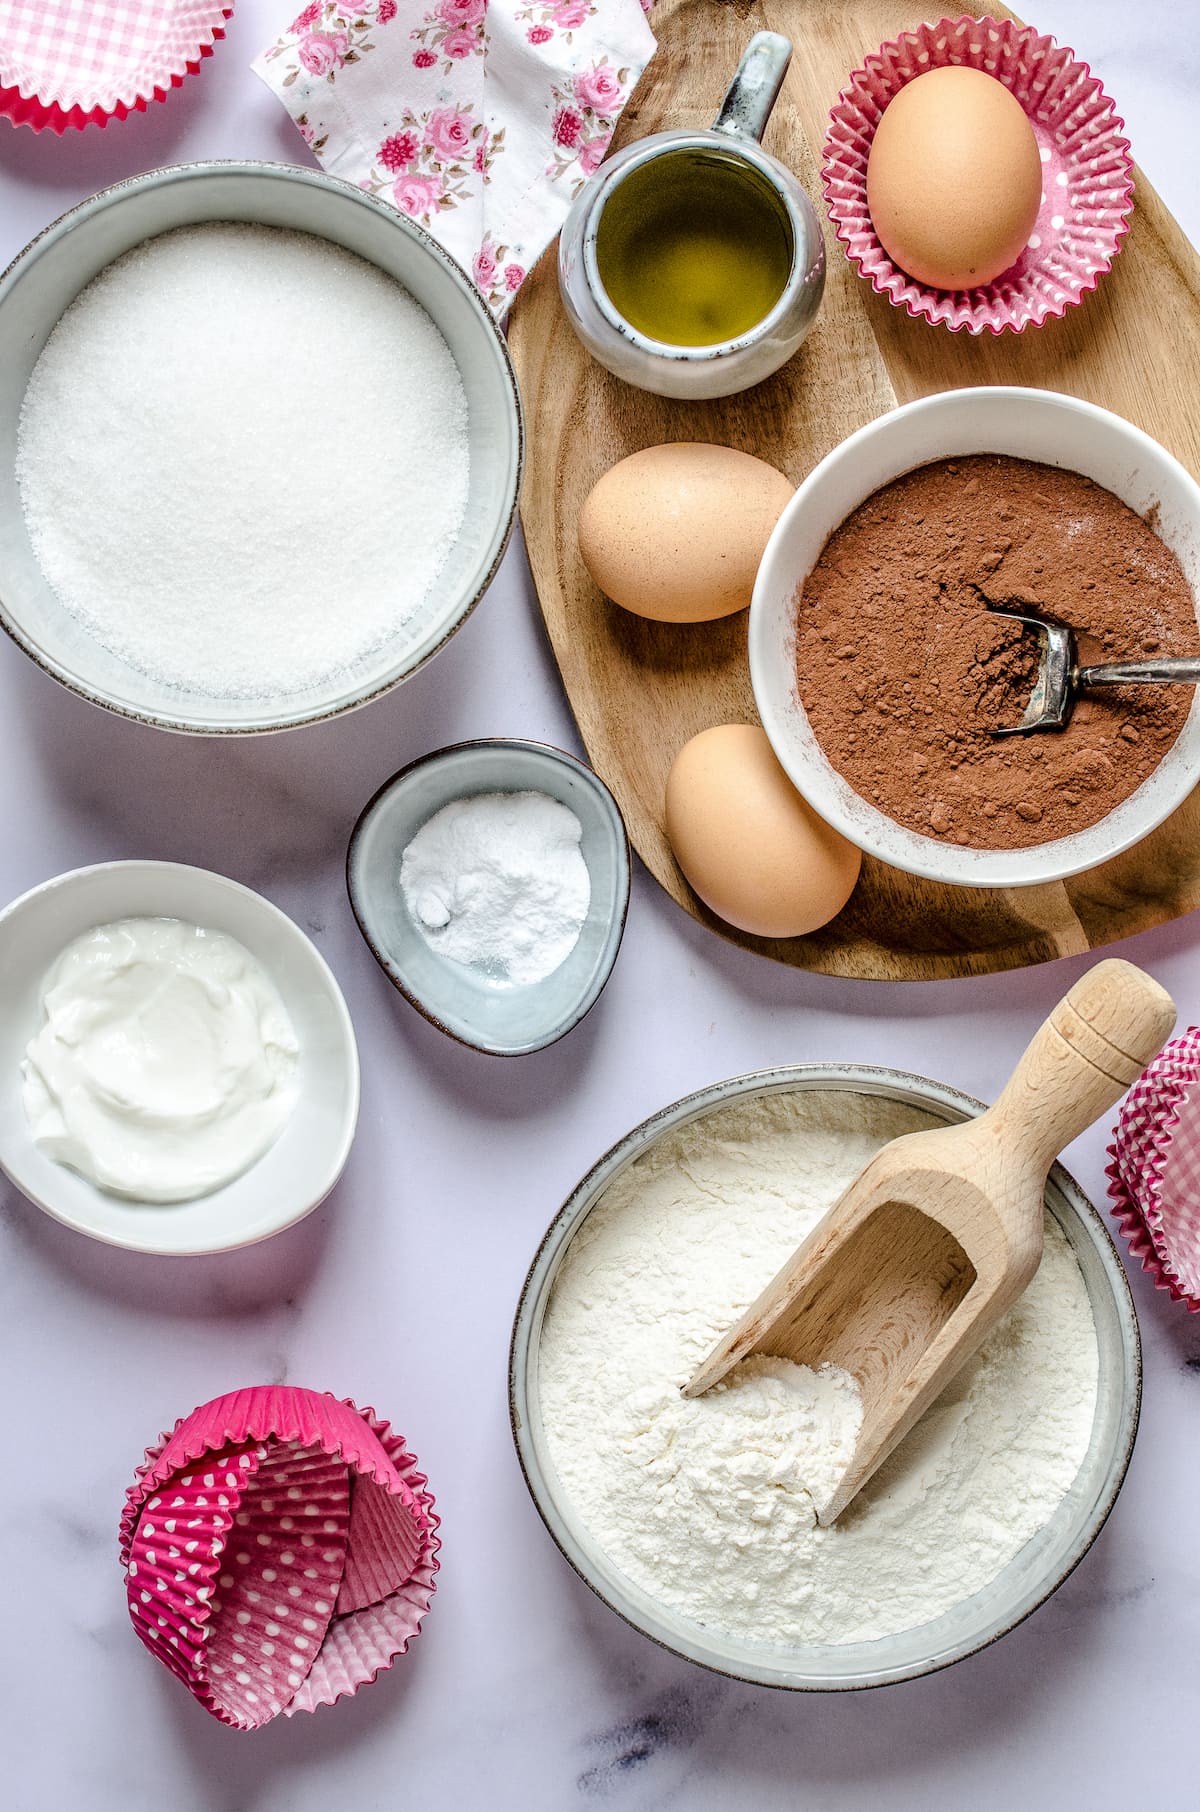 The ingredients for dark chocolate cupcakes: cocoa powder, milk, sugar, flour, eggs, vegetable oil, next to cupcake liners.